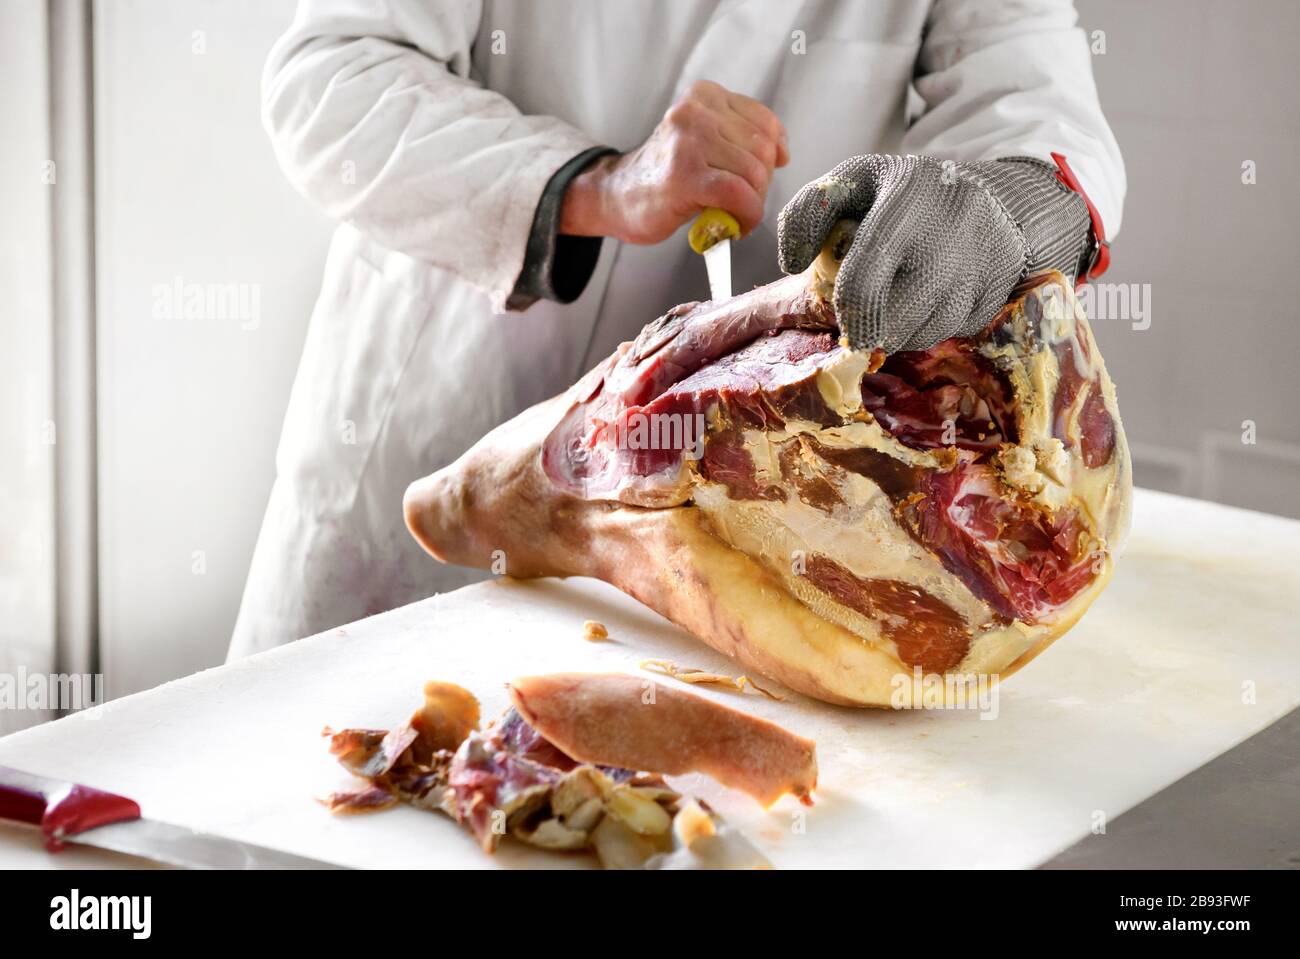 Butcher works on deboning ham, using cut resistance metal wire mesh glove for cutting protection Stock Photo